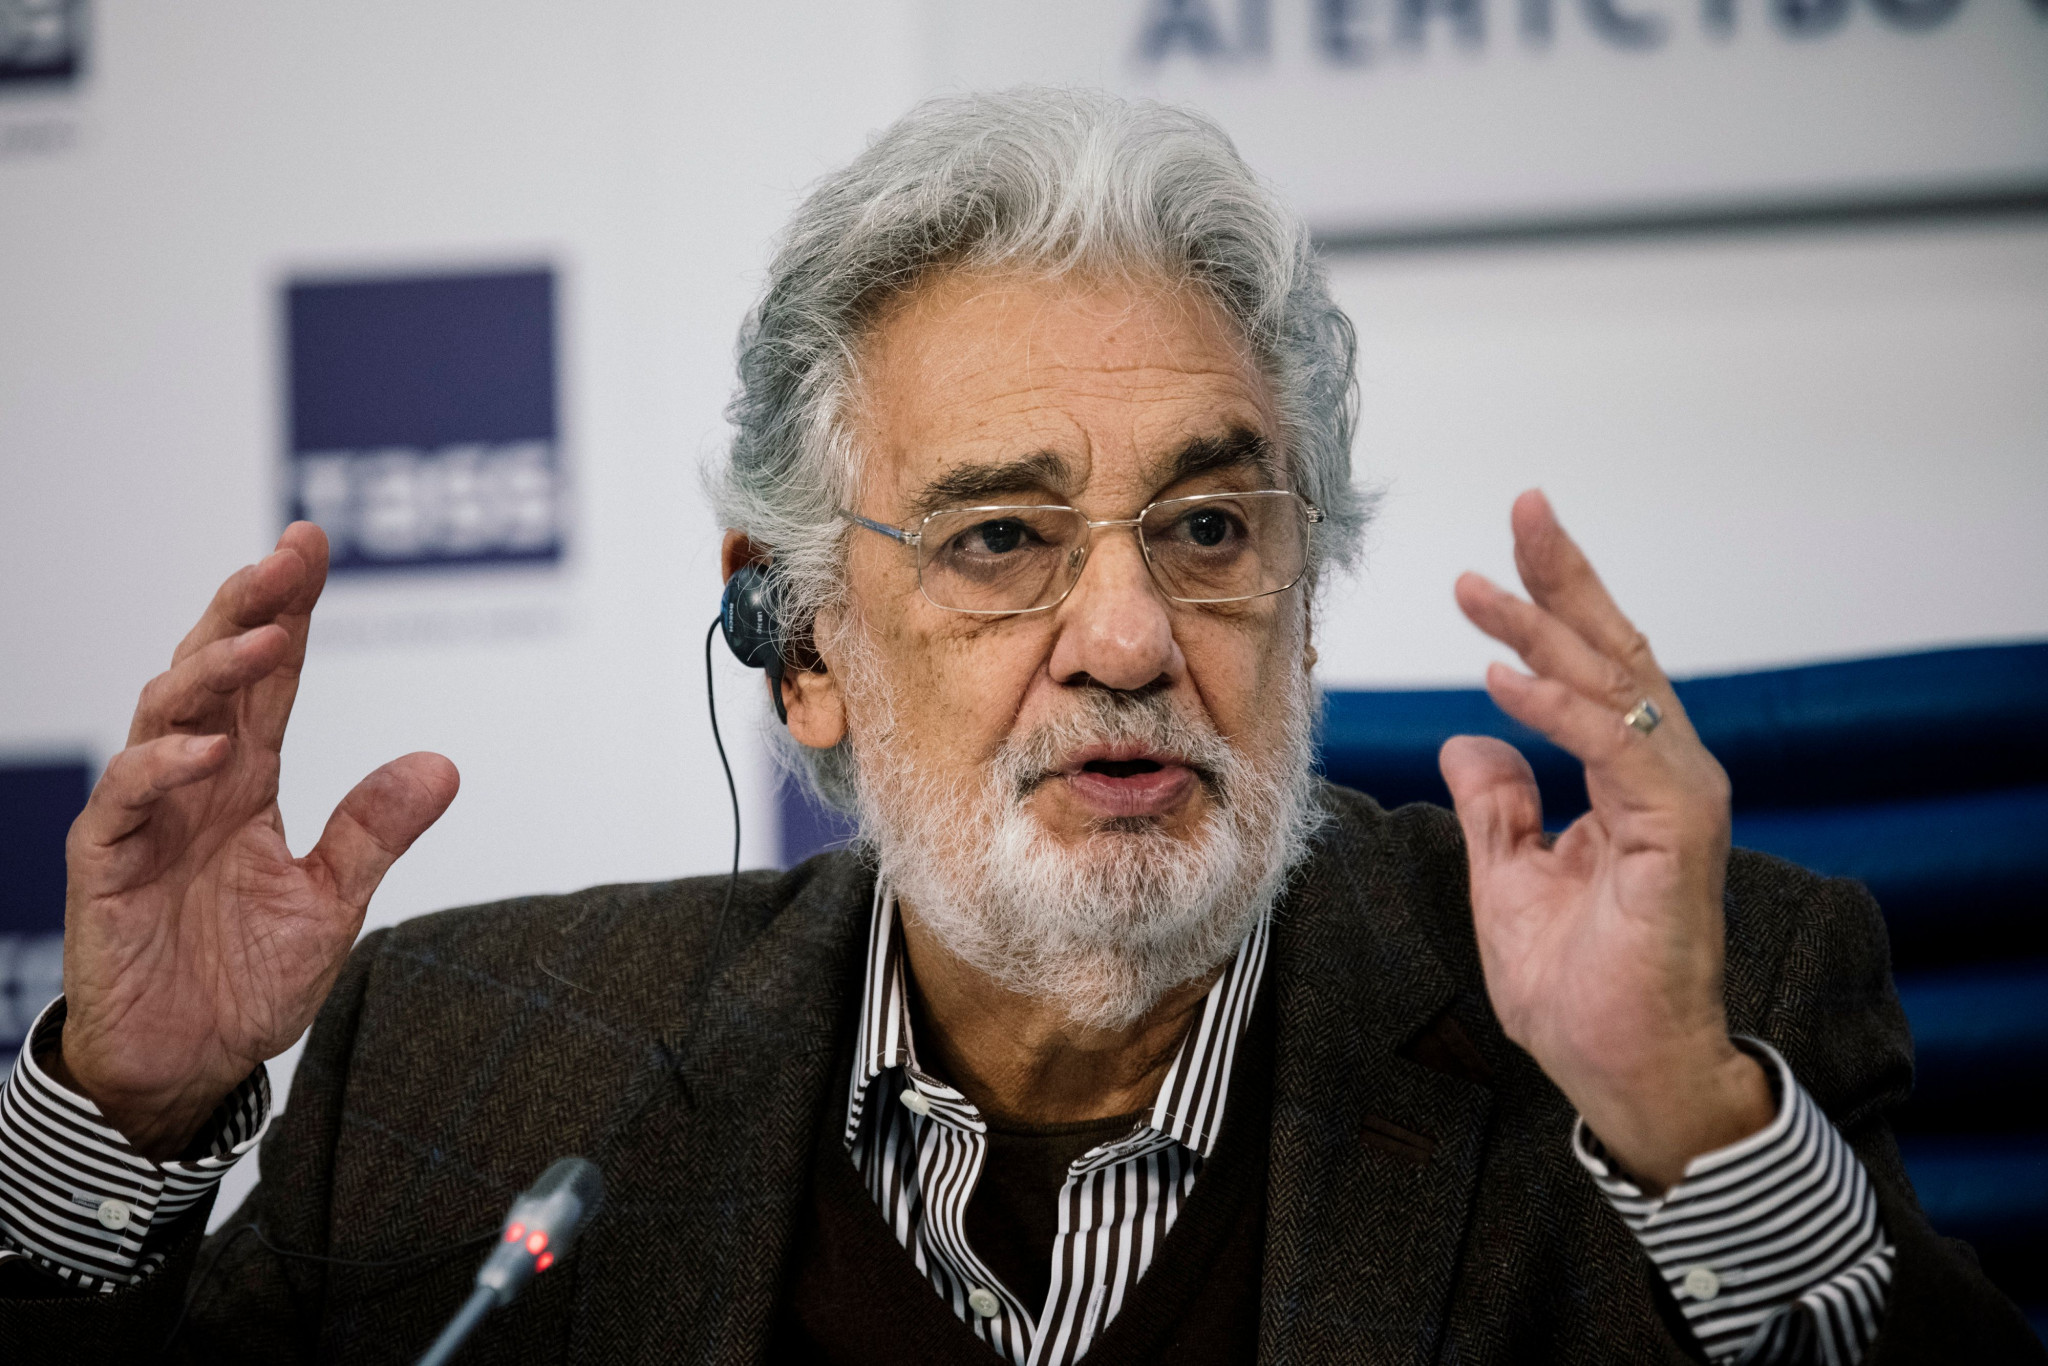 Plácido Domingo will not be taking part in a Tokyo 2020 cultural festival ©Getty Images